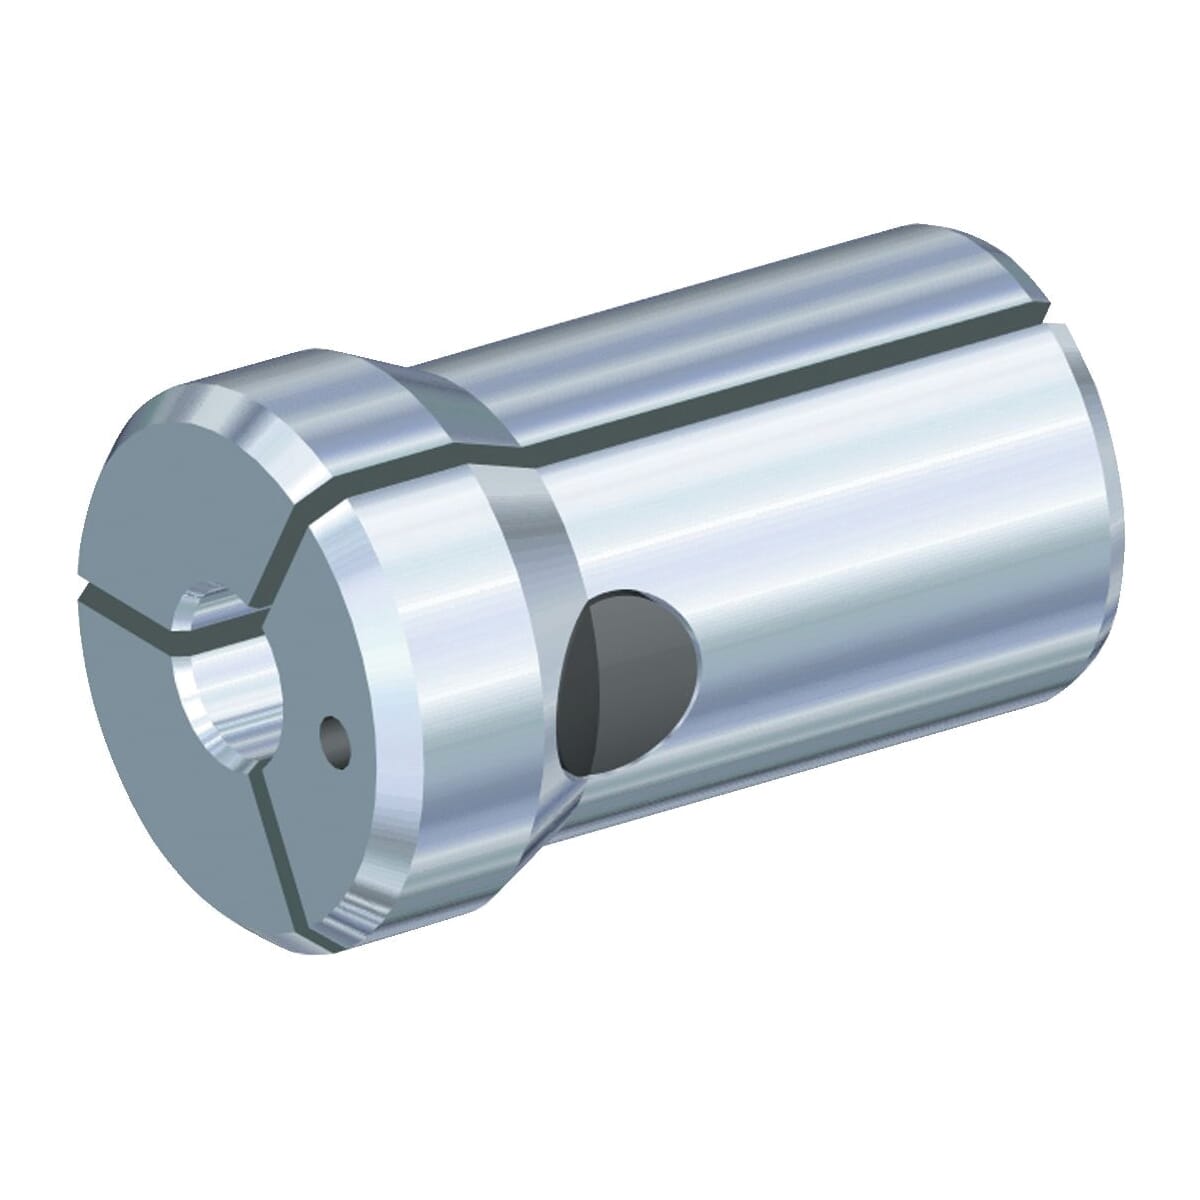 Kennametal® 1014762 DA Series Double Angle Standard Collet, 5/16 in, 1.188 in OAL, 0.2813 to 0.312 in Capacity, 1.188 in L Clamping Hole, 0.539 in Dia Body, 0.539 in Dia Head